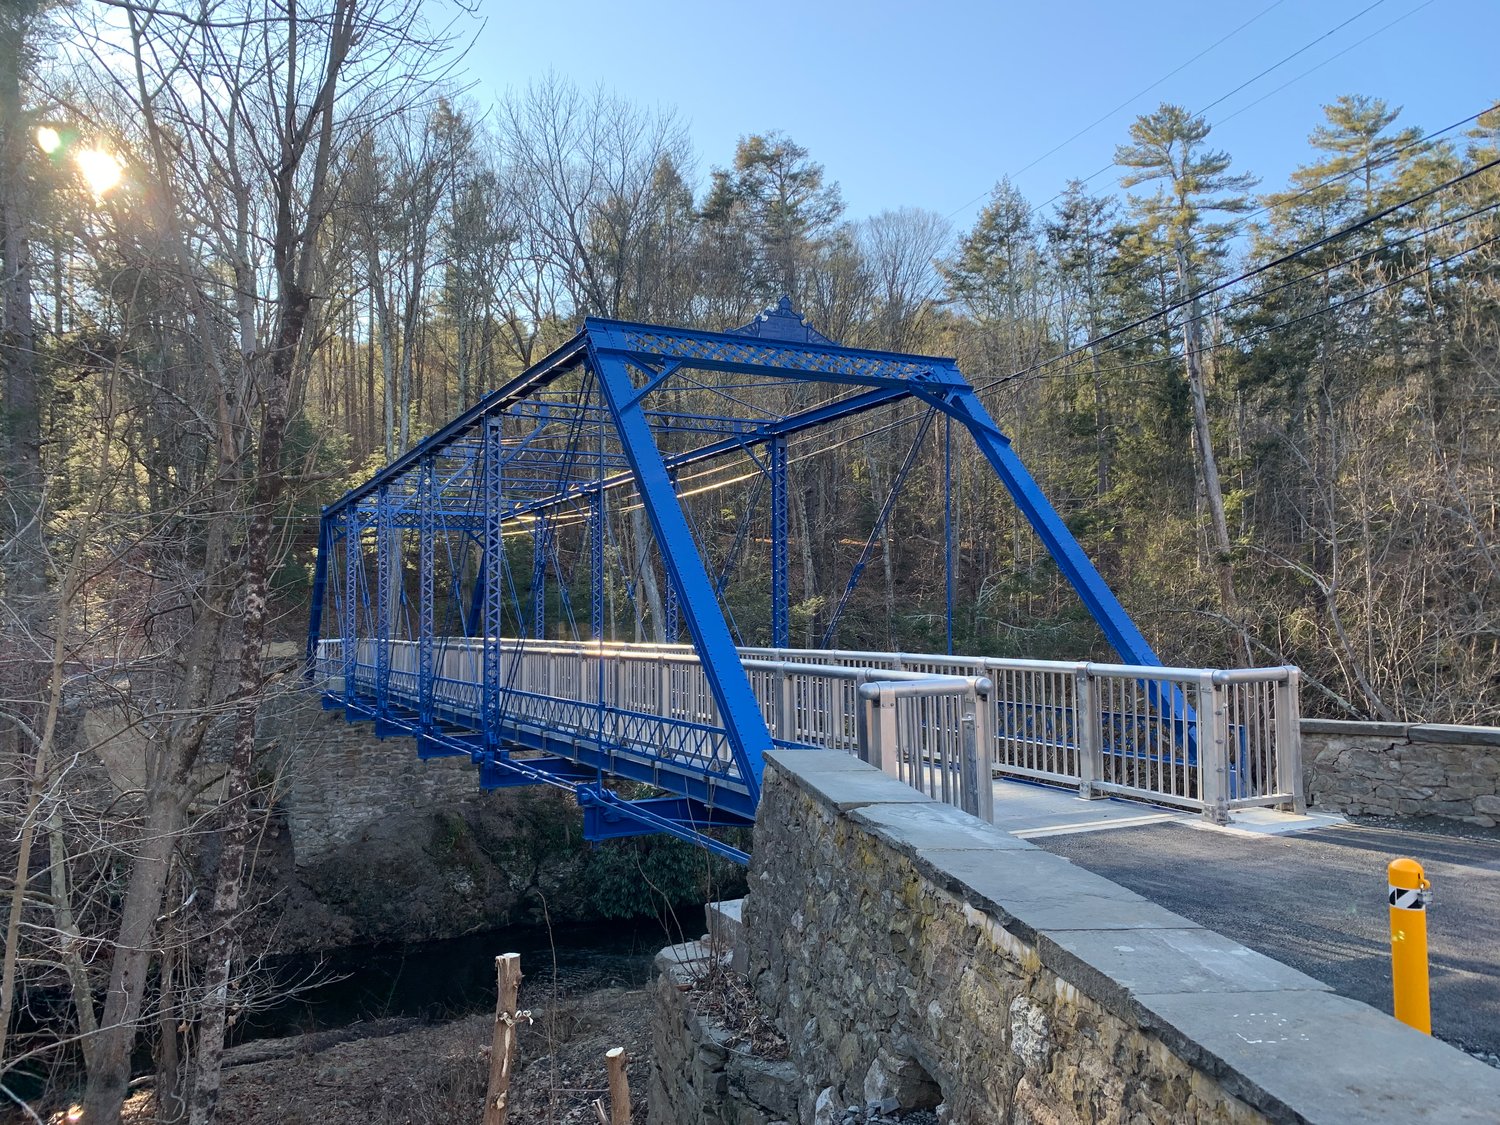 Beyond the rehabilitated blue bridge is a revitalizing footpath and a forested glen that is likely to send one’s sagging spirits down the Sawkill Creek flowing nearby.